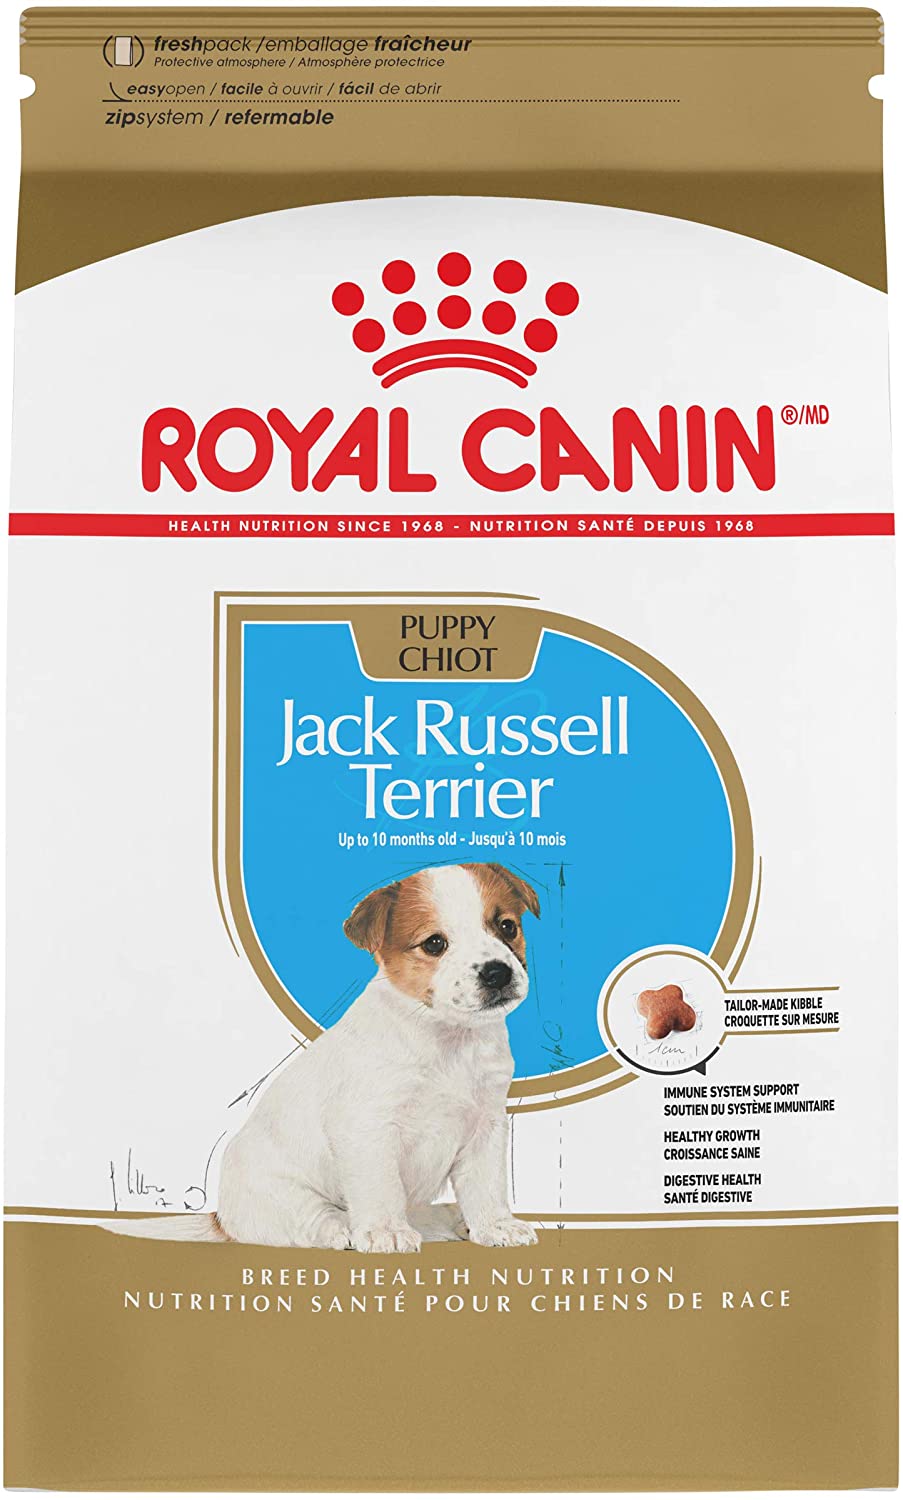 Royal Canin for Russell Terrier